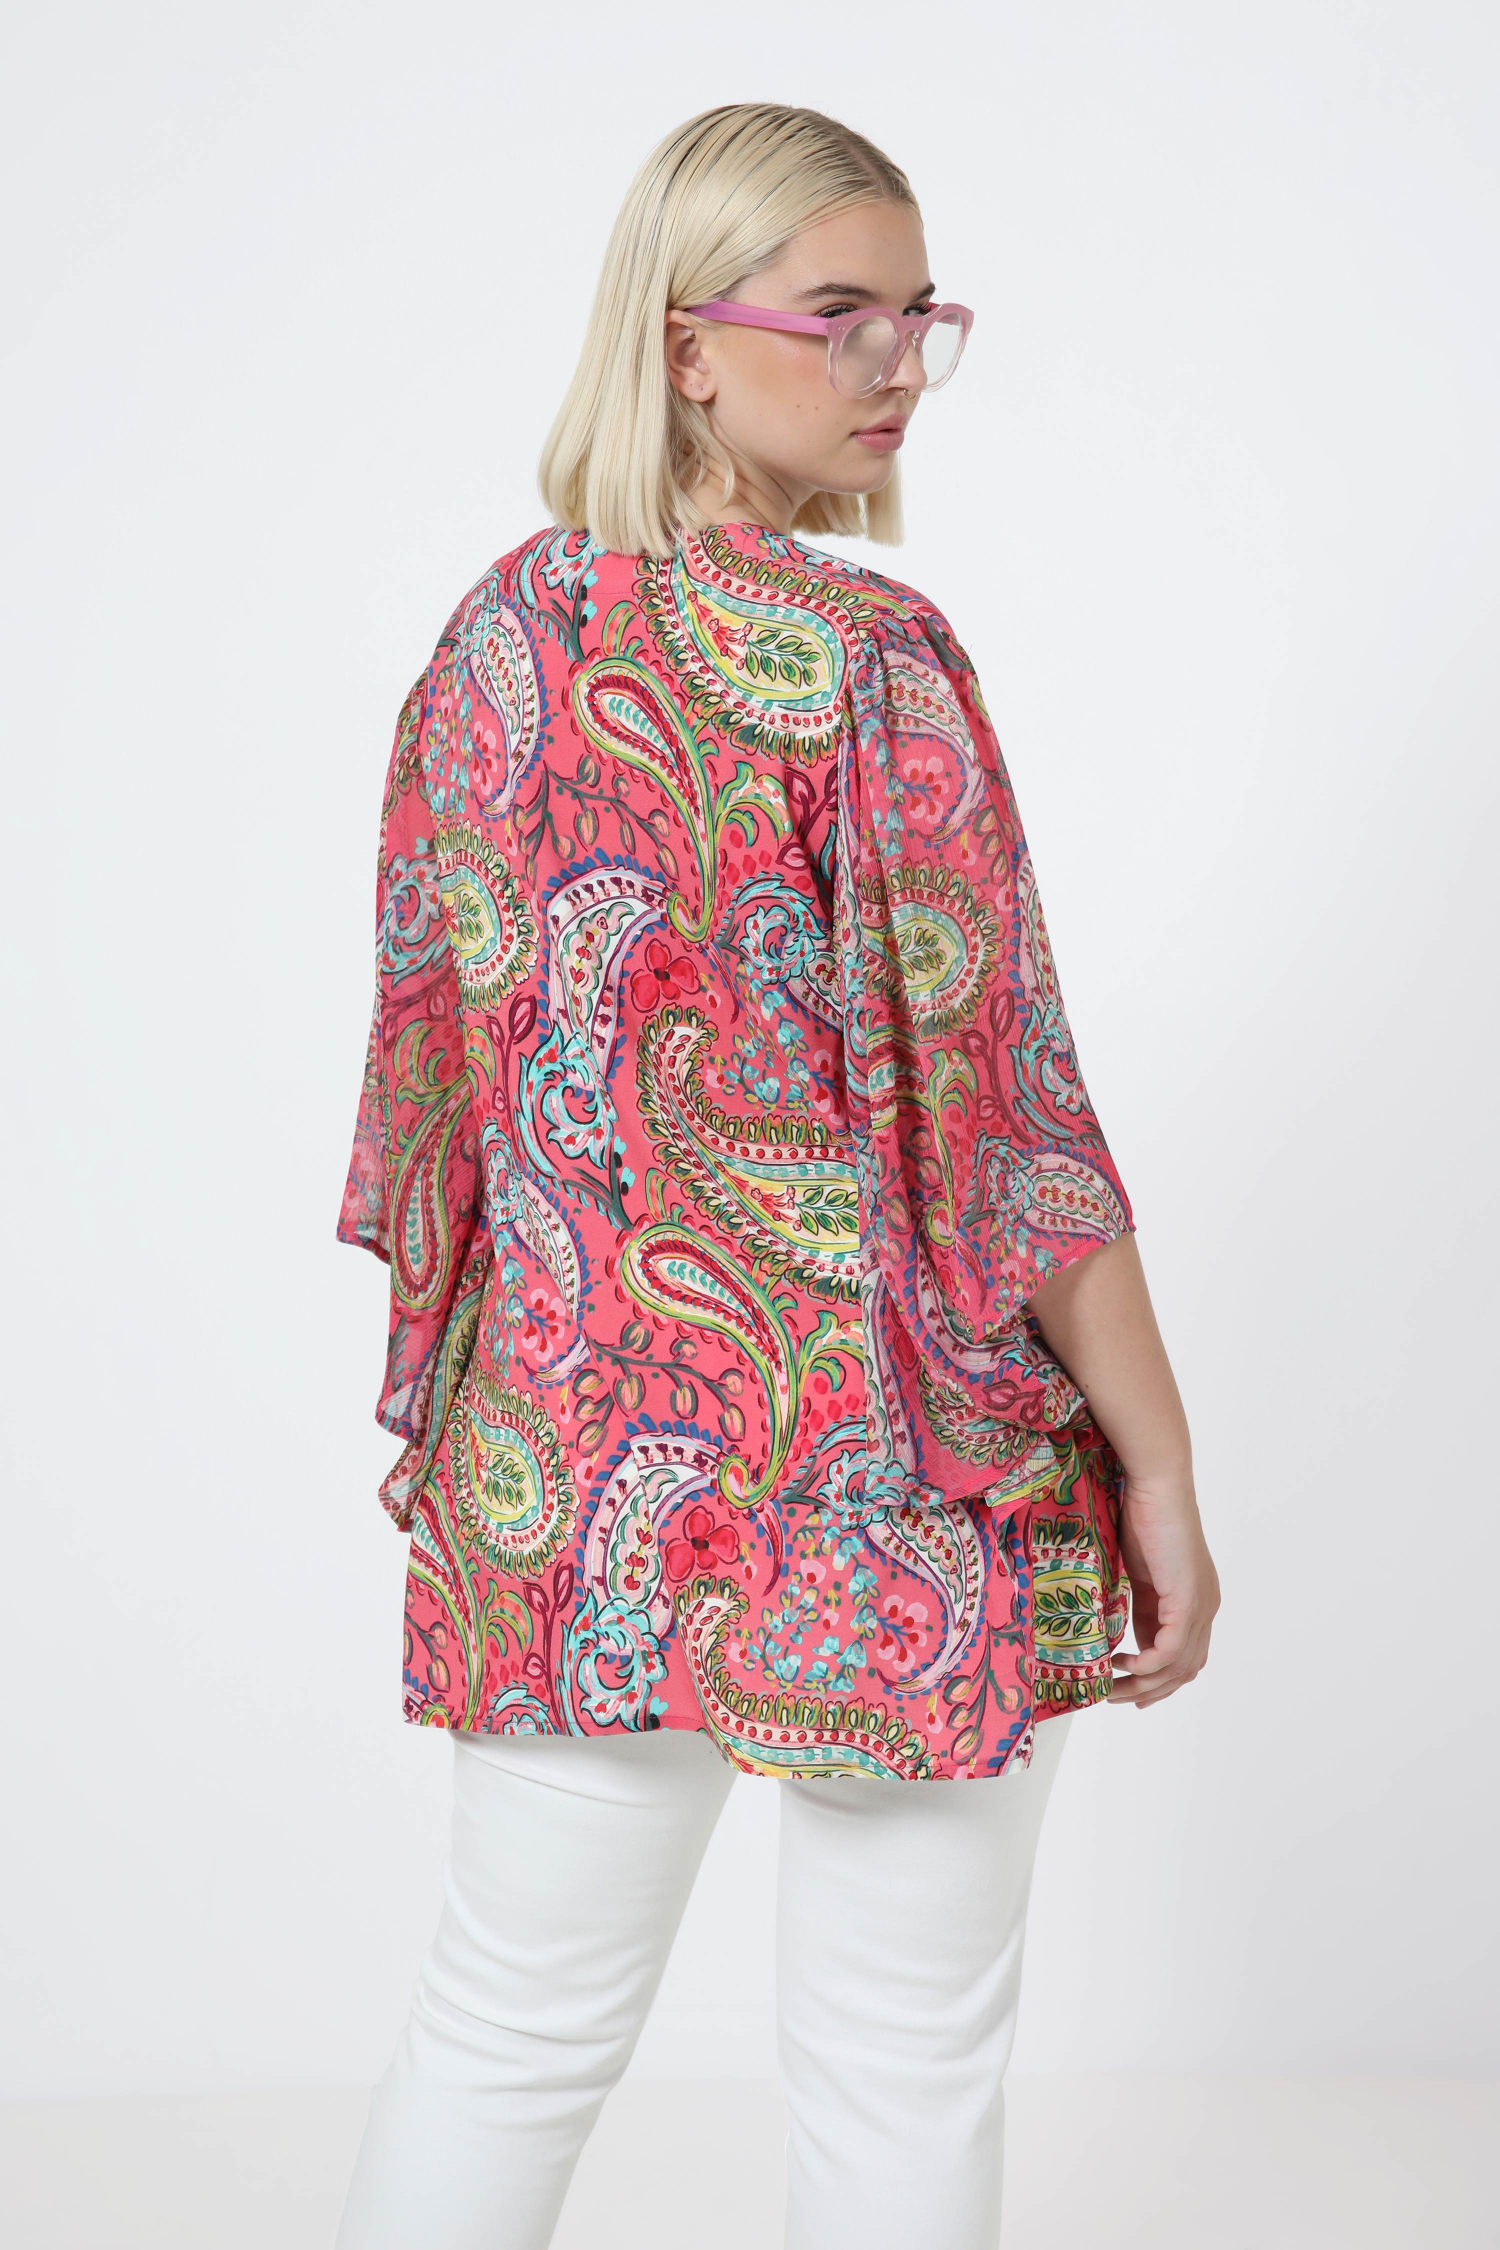 Printed blouse with butterfly sleeves